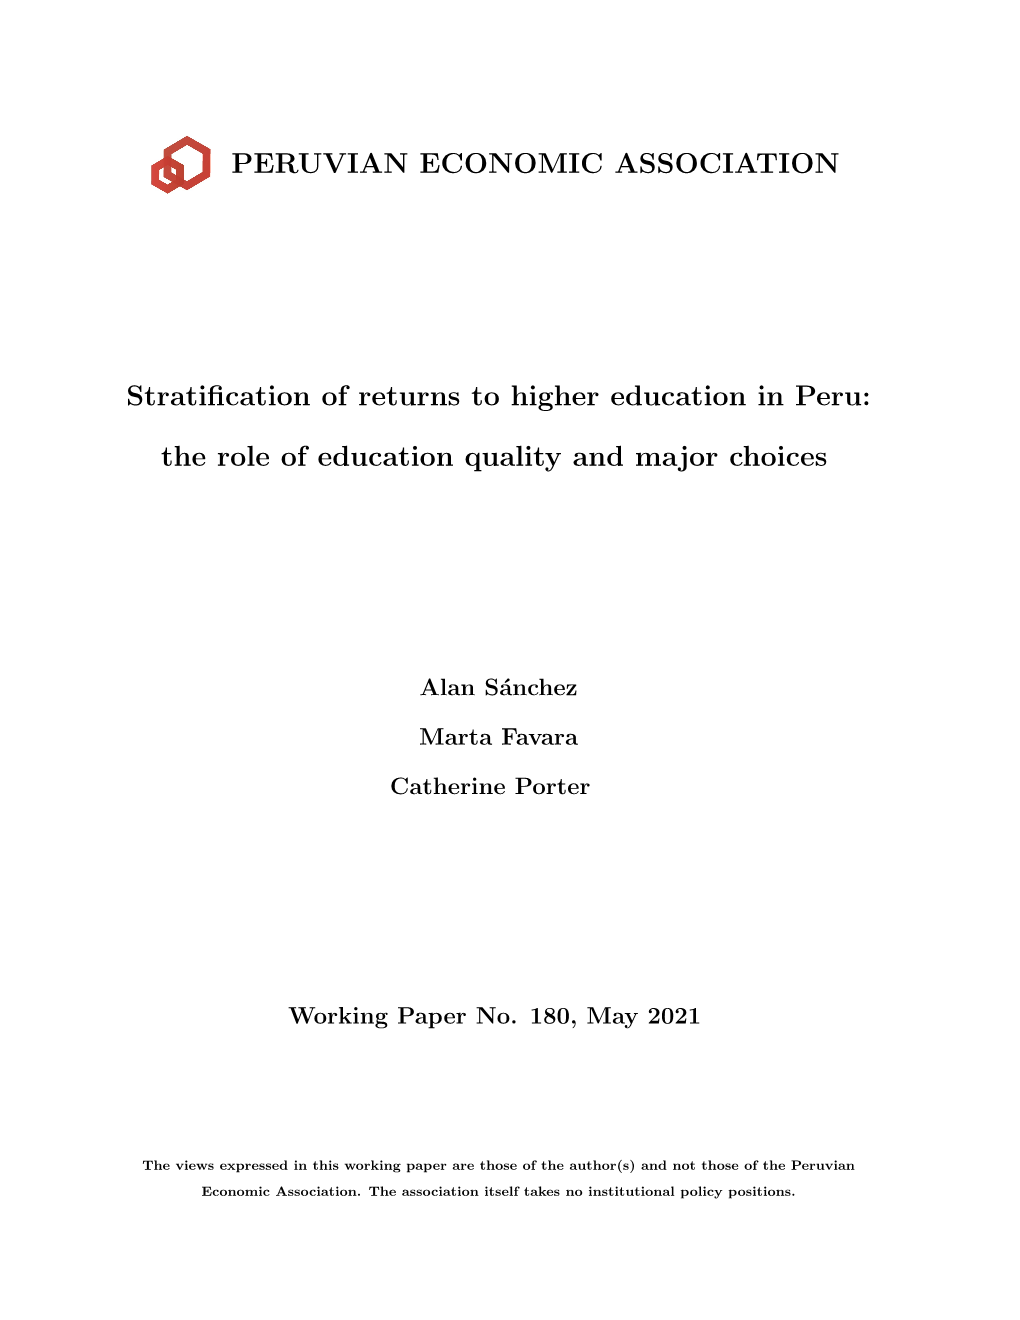 PERUVIAN ECONOMIC ASSOCIATION Stratification of Returns to Higher Education in Peru: the Role of Education Quality and Major